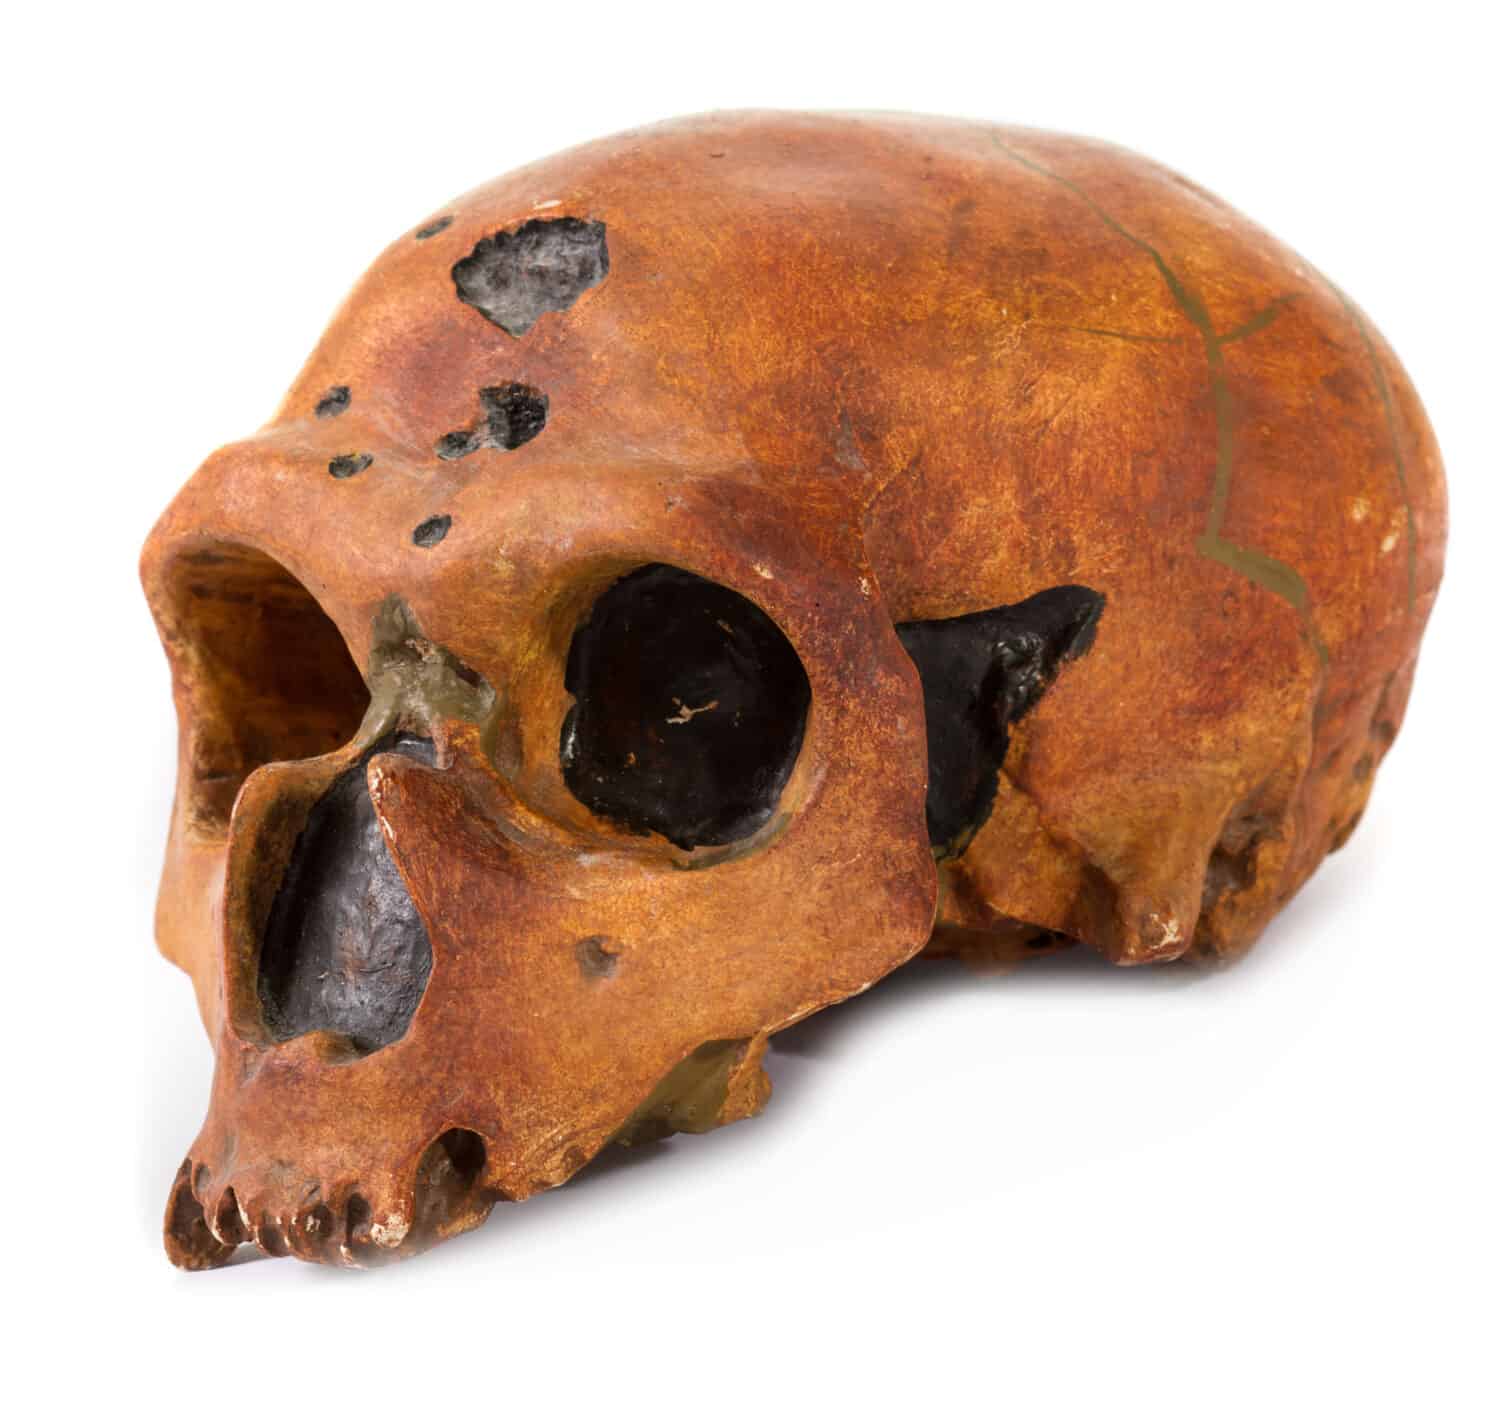 Fossil remains of Ardipithecus kadabba, an ancient hominid species believed to be a direct ancestor of modern humans.